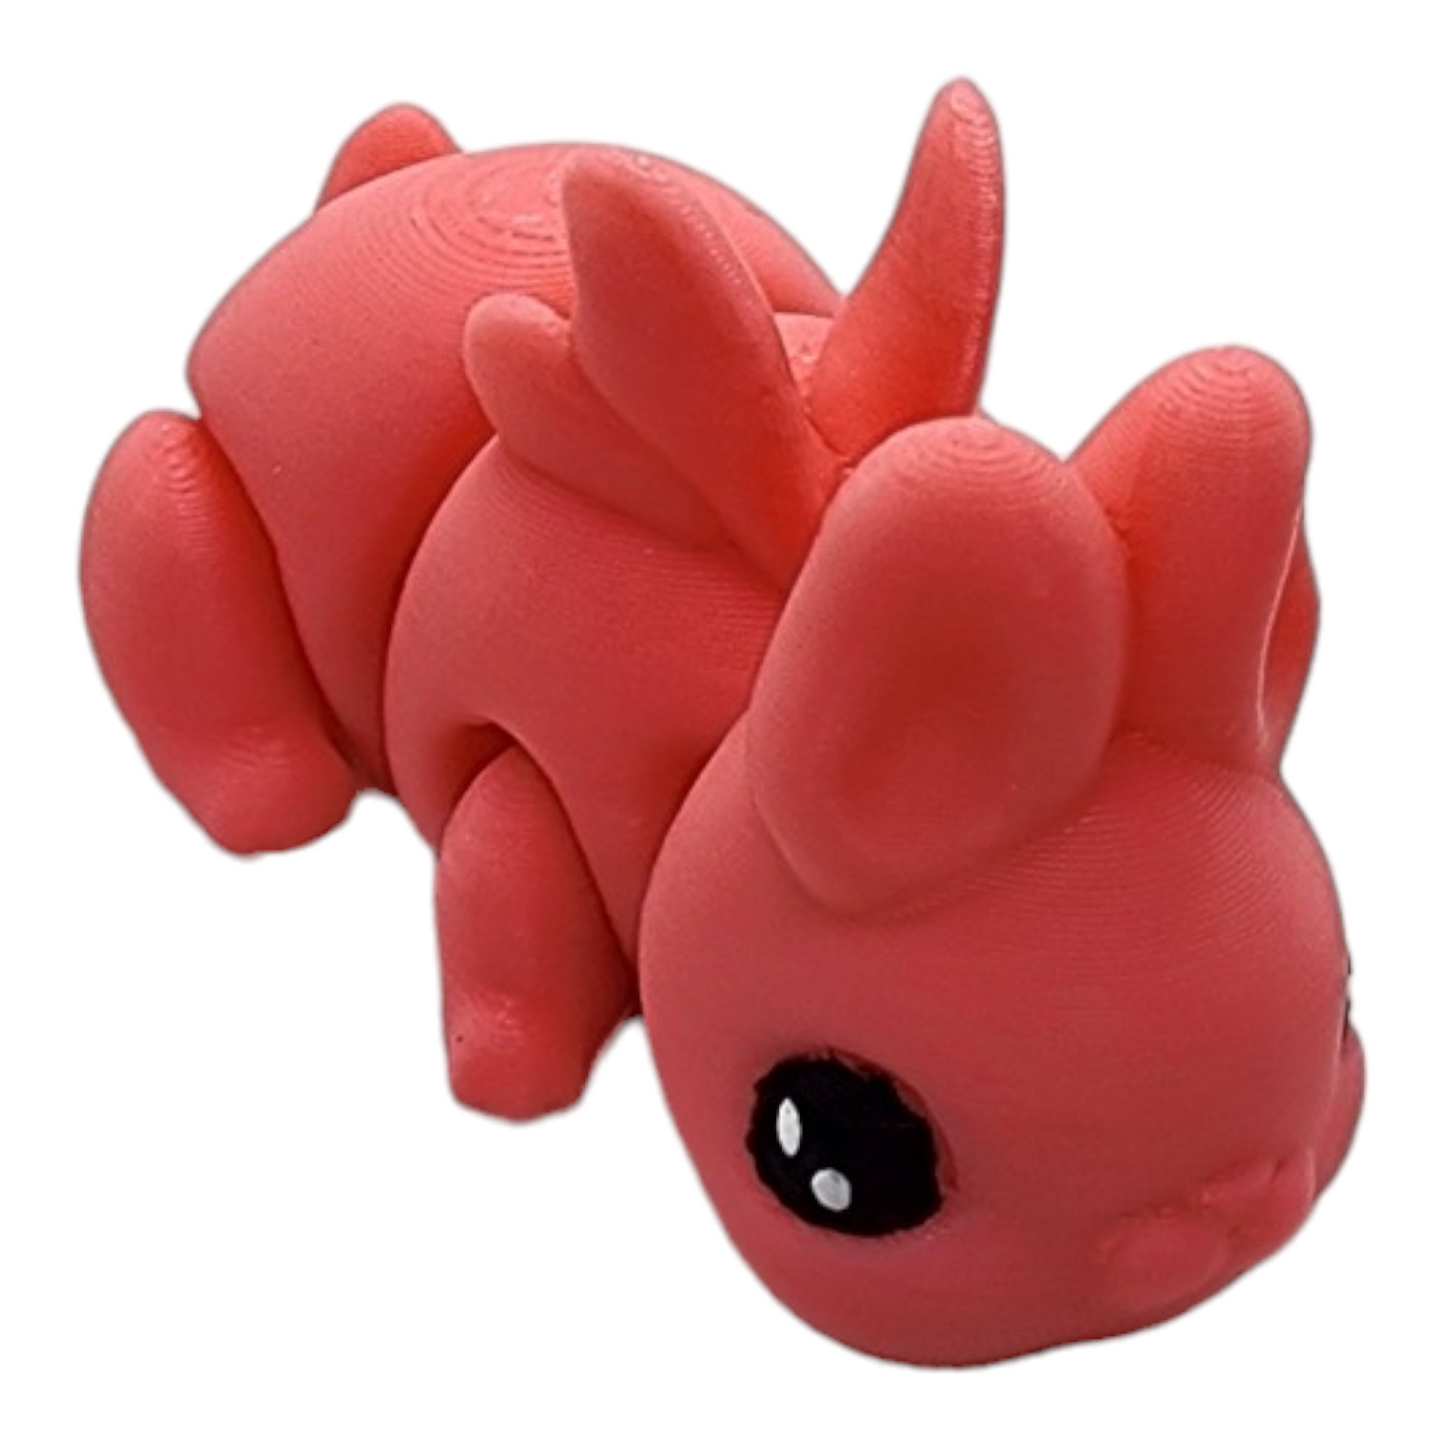 3-D Printed Articulated Bunny